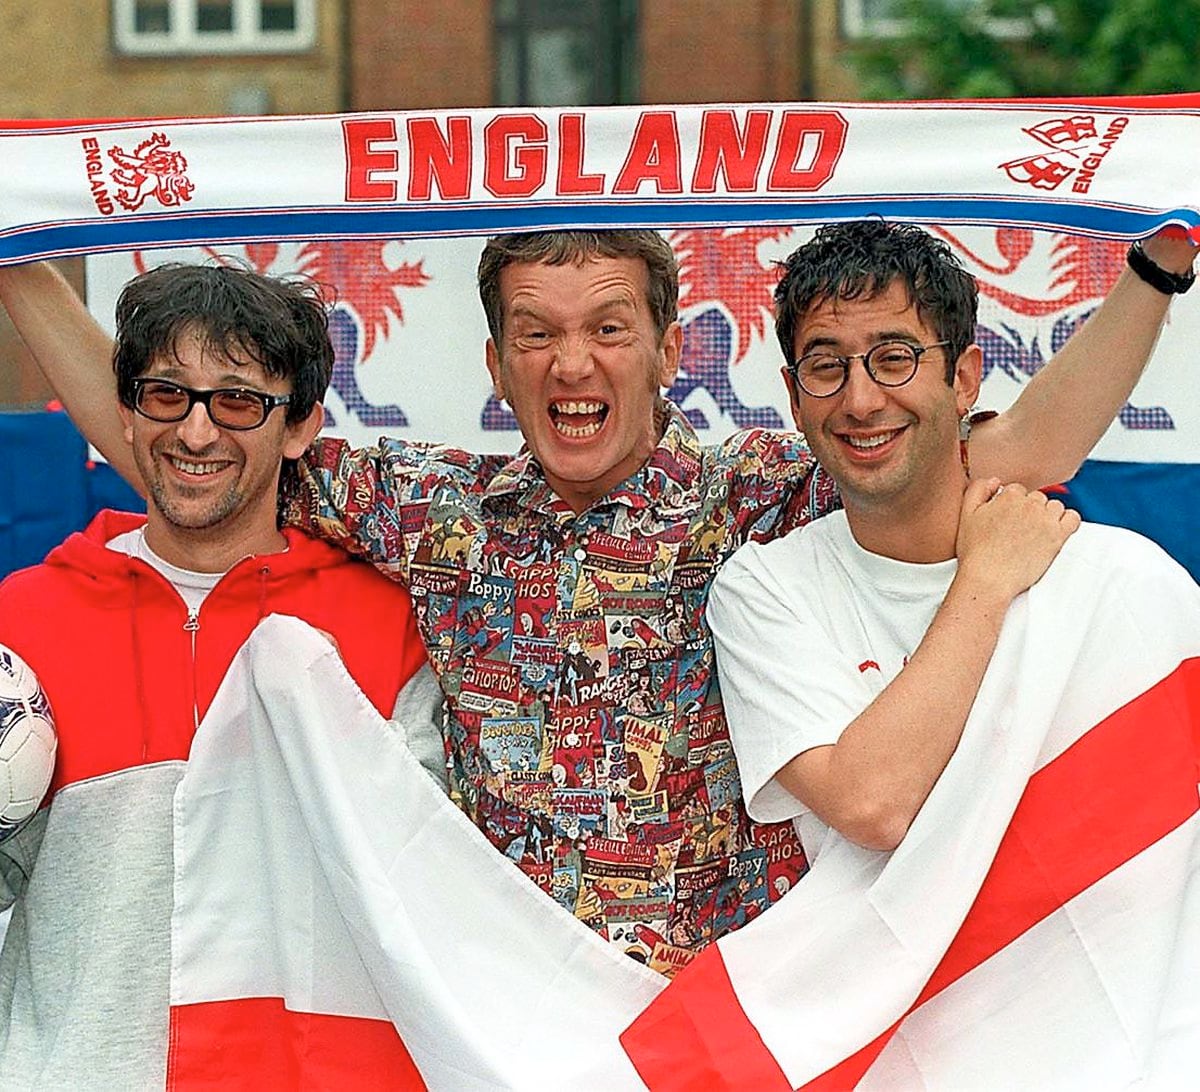 World Cup Three Lions release...Ian Broudie from the Lightening Seeds (left to right), comediens Frank Skinner and David Baddiel at a photocall announcing their new recorded version of the Three Lions to coincide with the 1998 World Cup today (Friday). Photo PA.